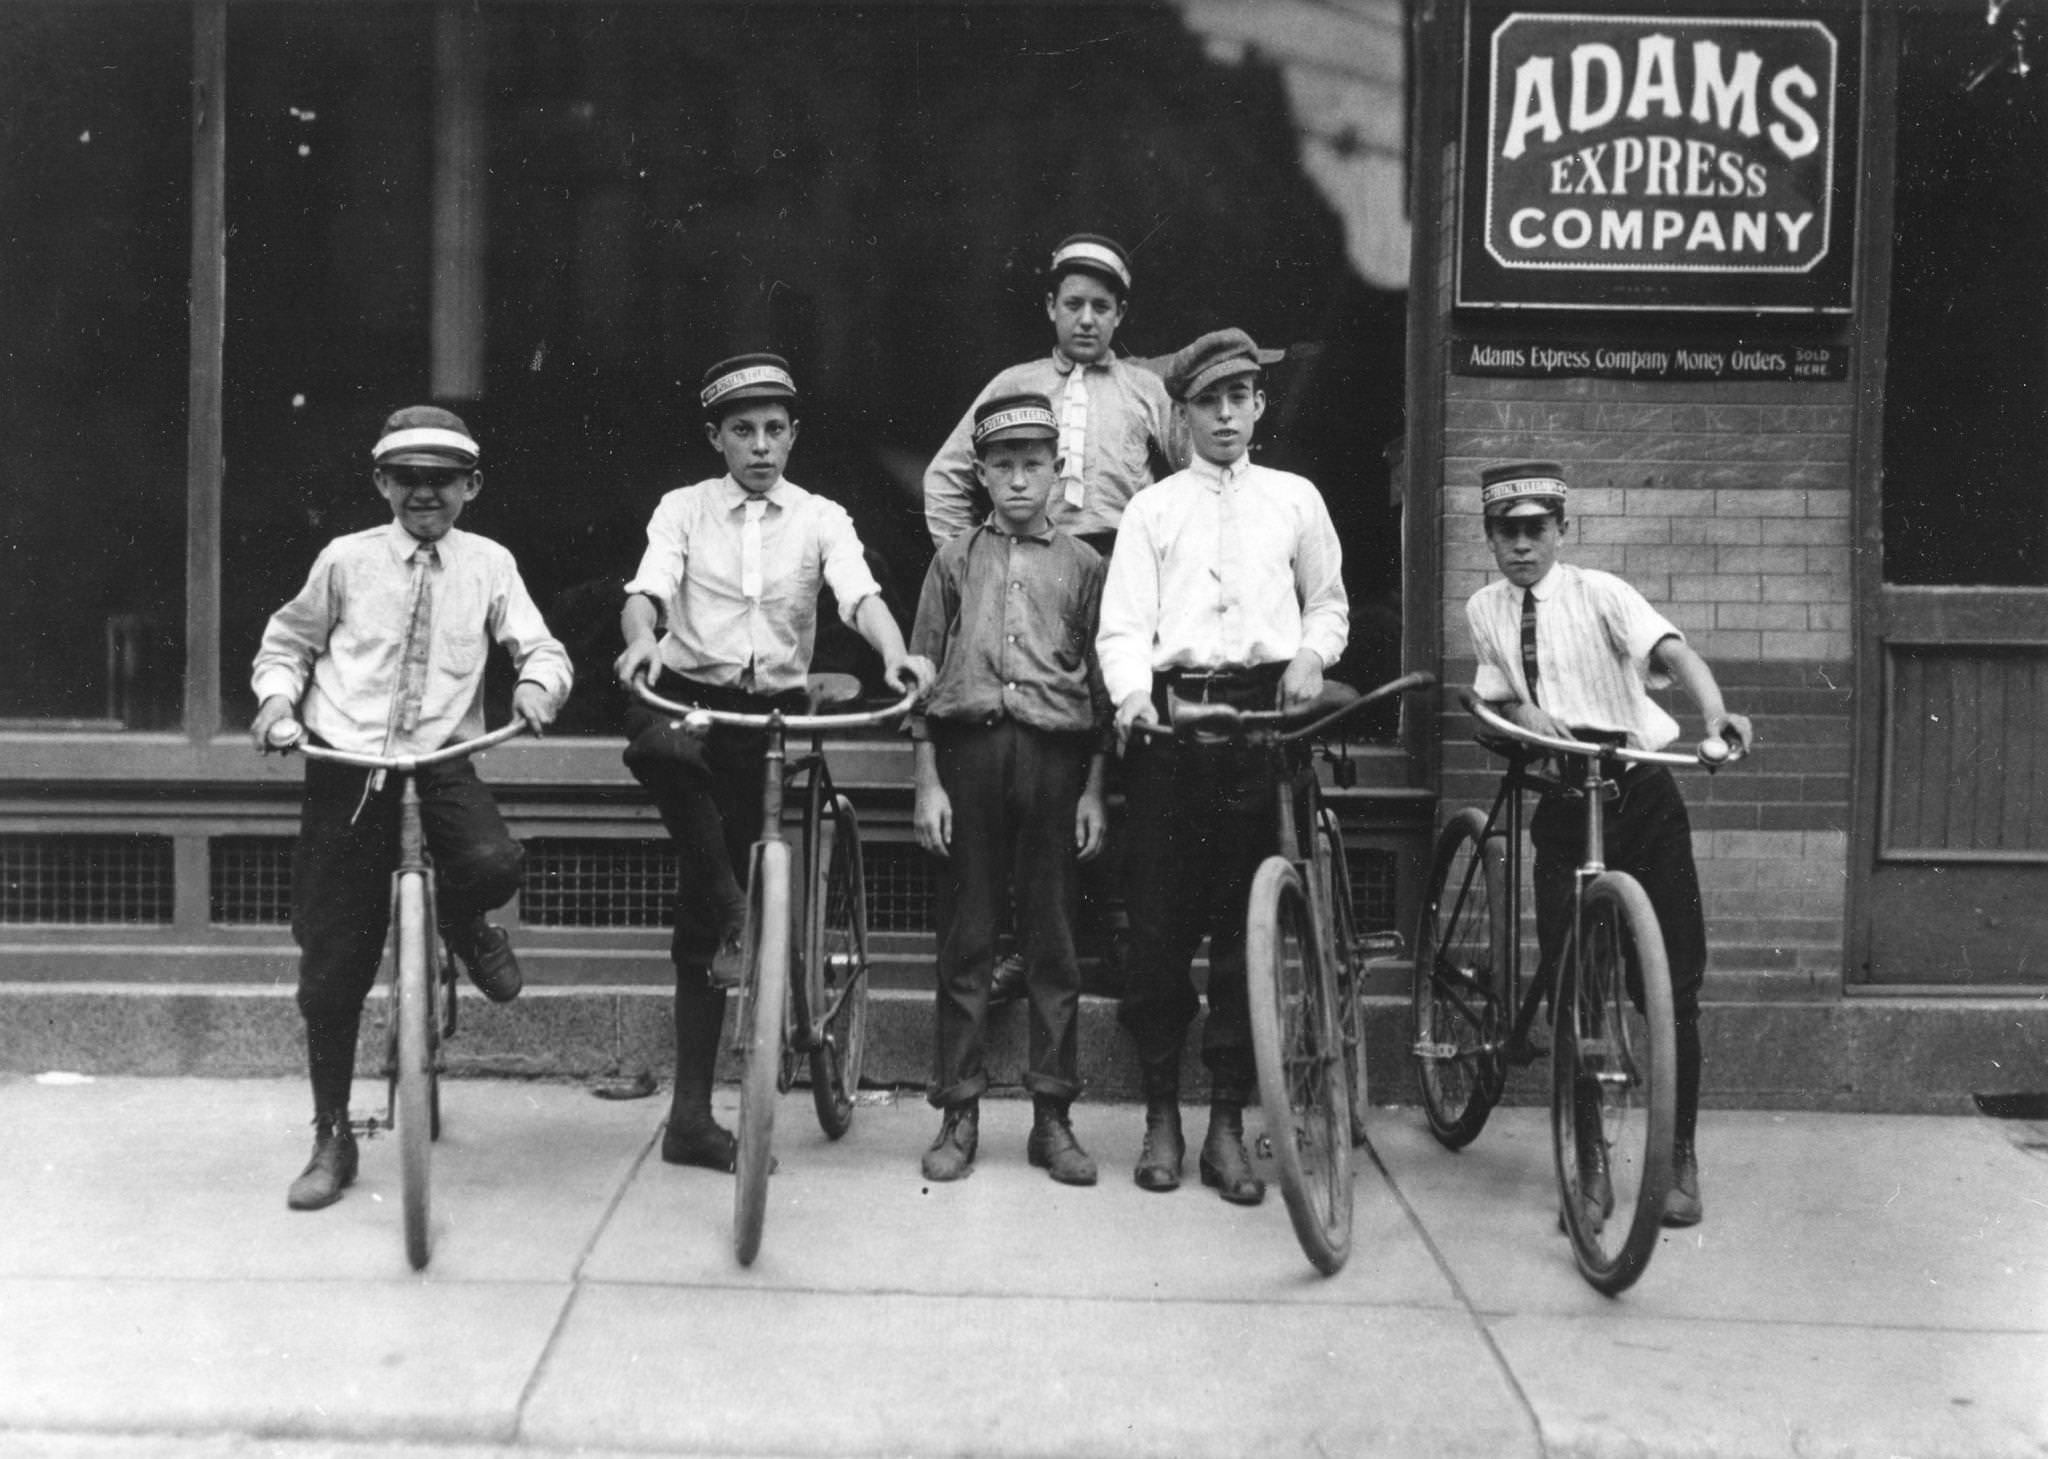 Postal messenger boys wait for deliveries on their bicycles, Norfolk, Virginia, June 1911.